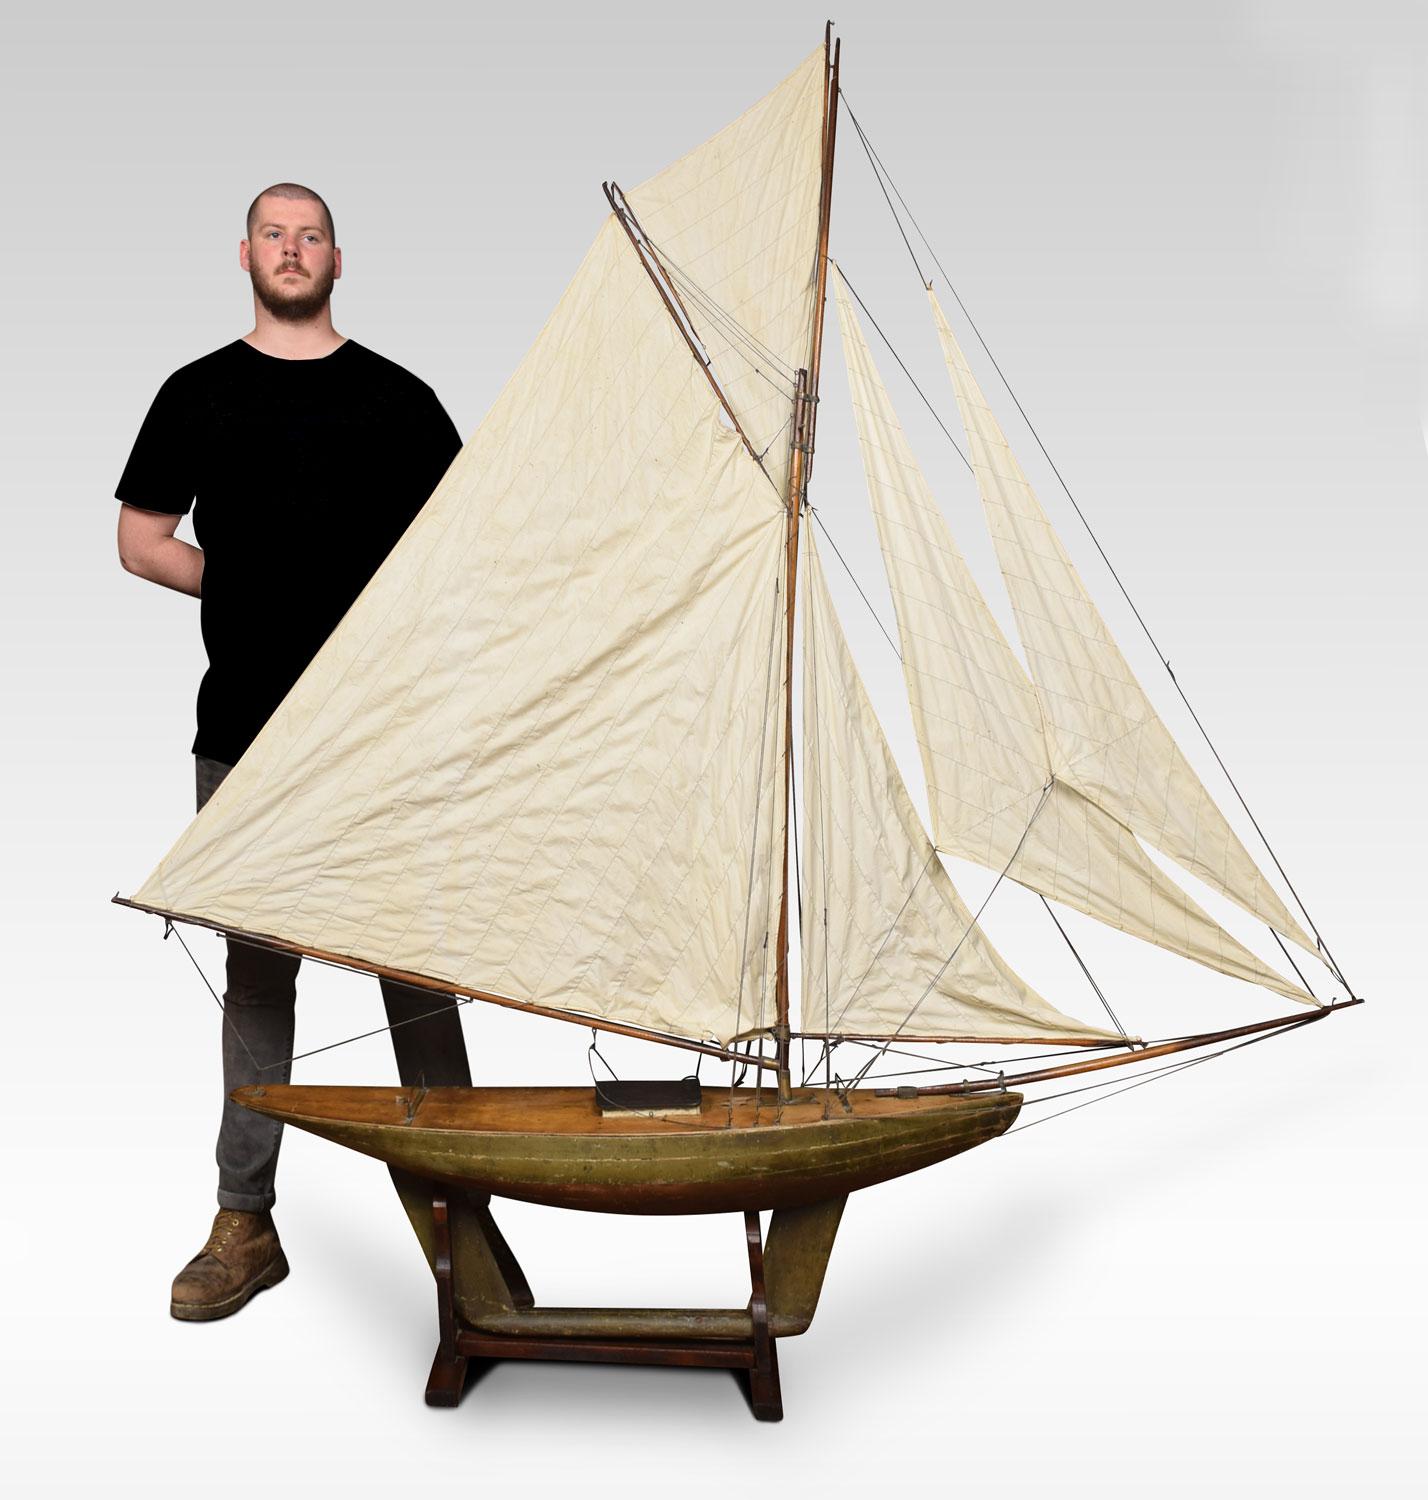 Edwardian pond yacht, painted in green complete with five sails and simulated planked decking.
Dimensions:
Height 84 inches
Width 81 inches
Depth 11 inches.